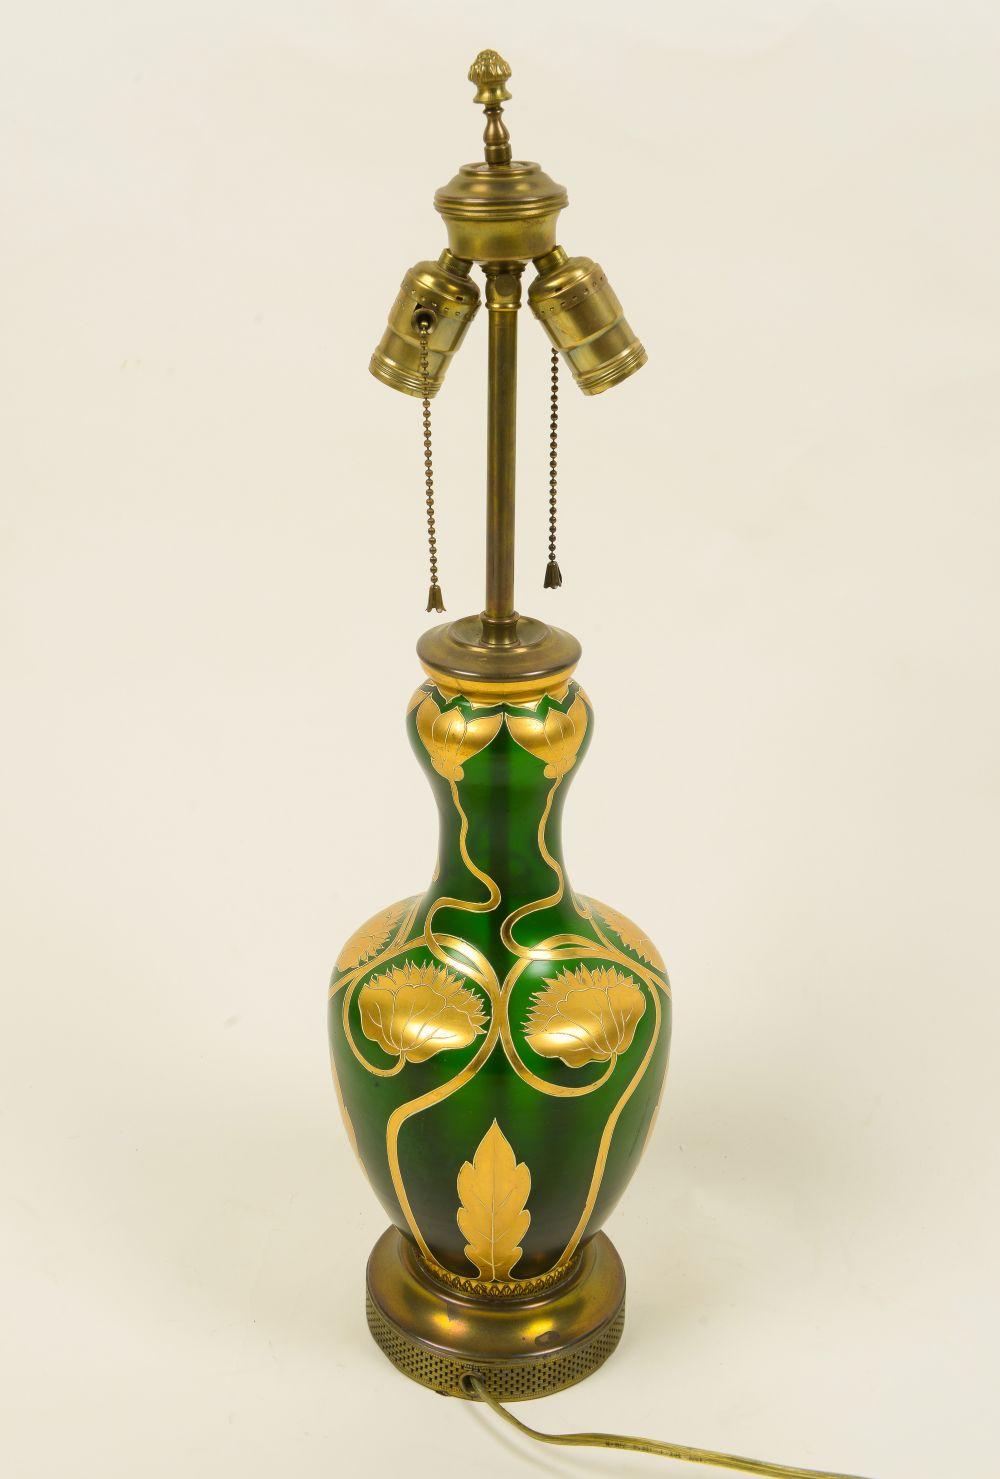 The baluster-form vase decorated overall in gilt with twining vines terminating in peony blossoms with a stiff leaf border at the base; fitted with two bulb sockets; mounted on a brass turned base; adjustable height.